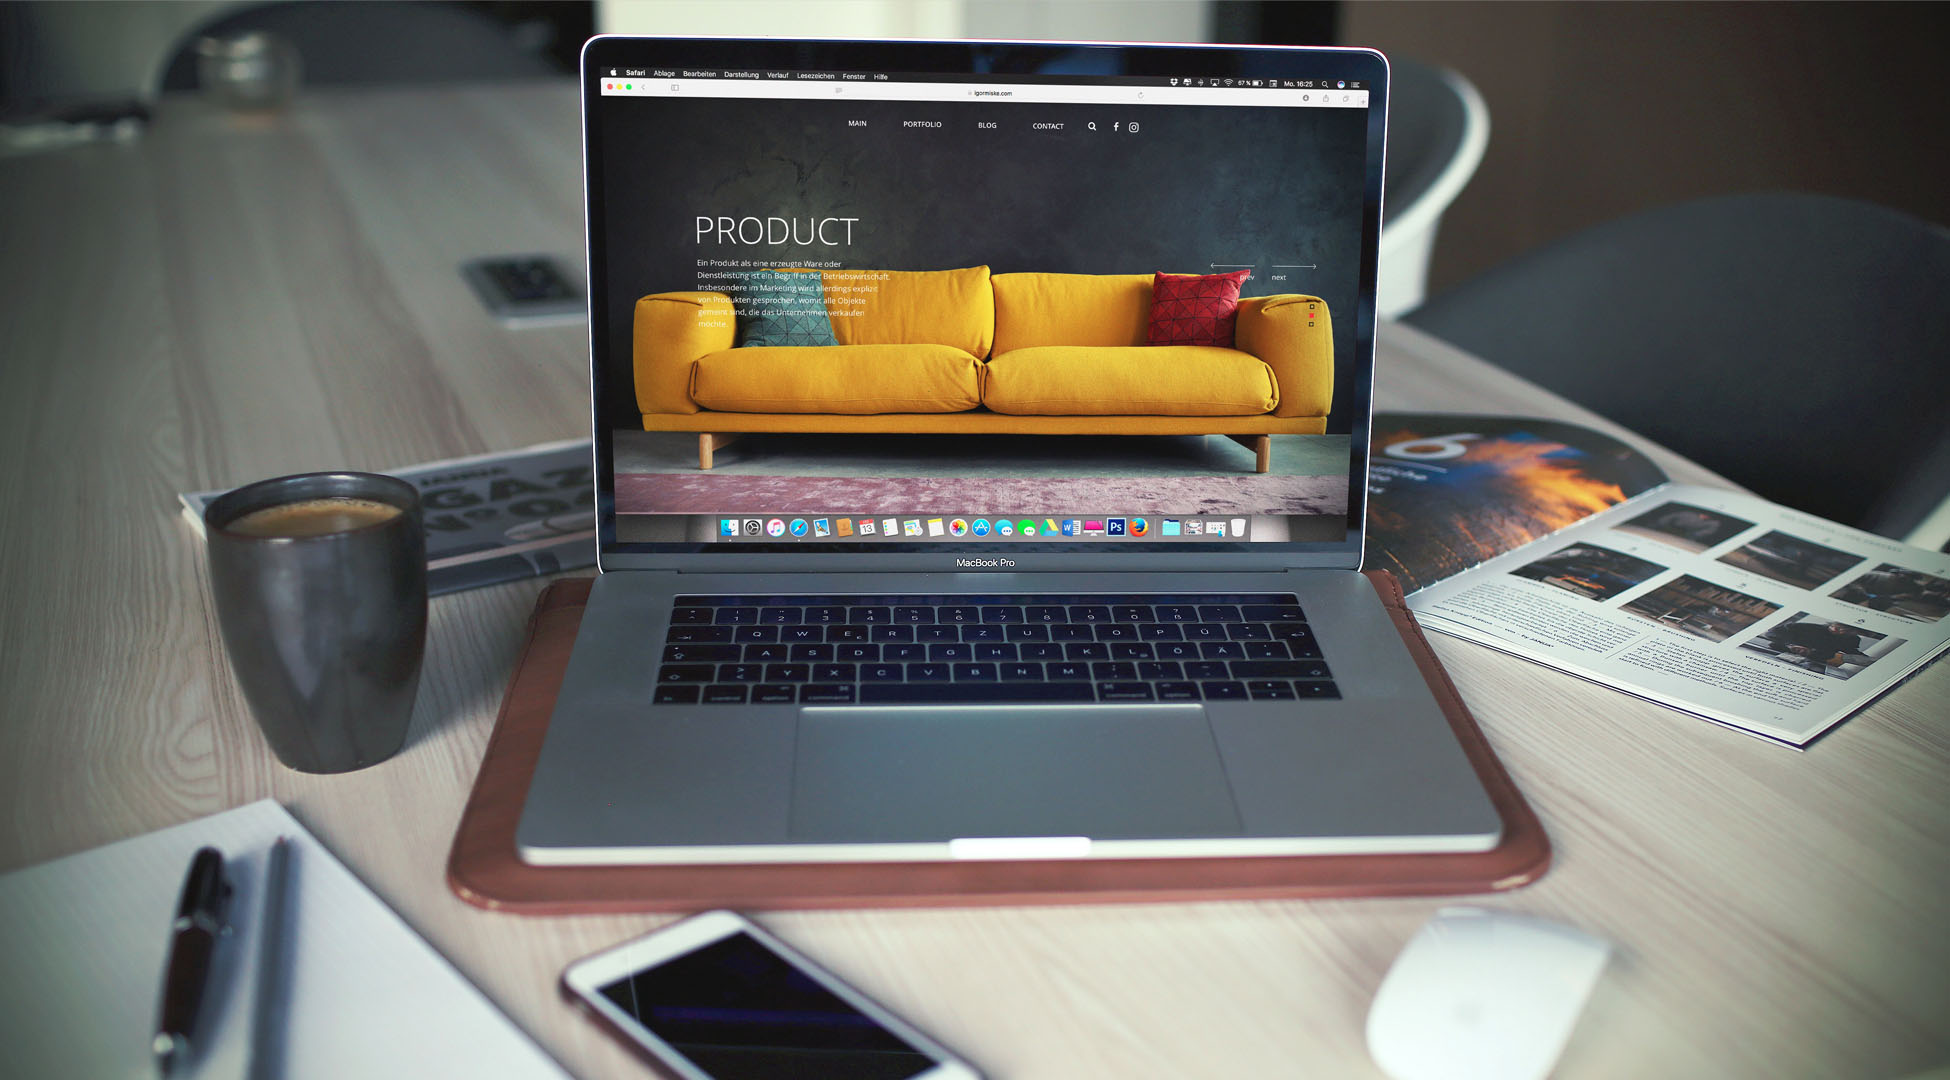 Open laptop with a website showing a couch